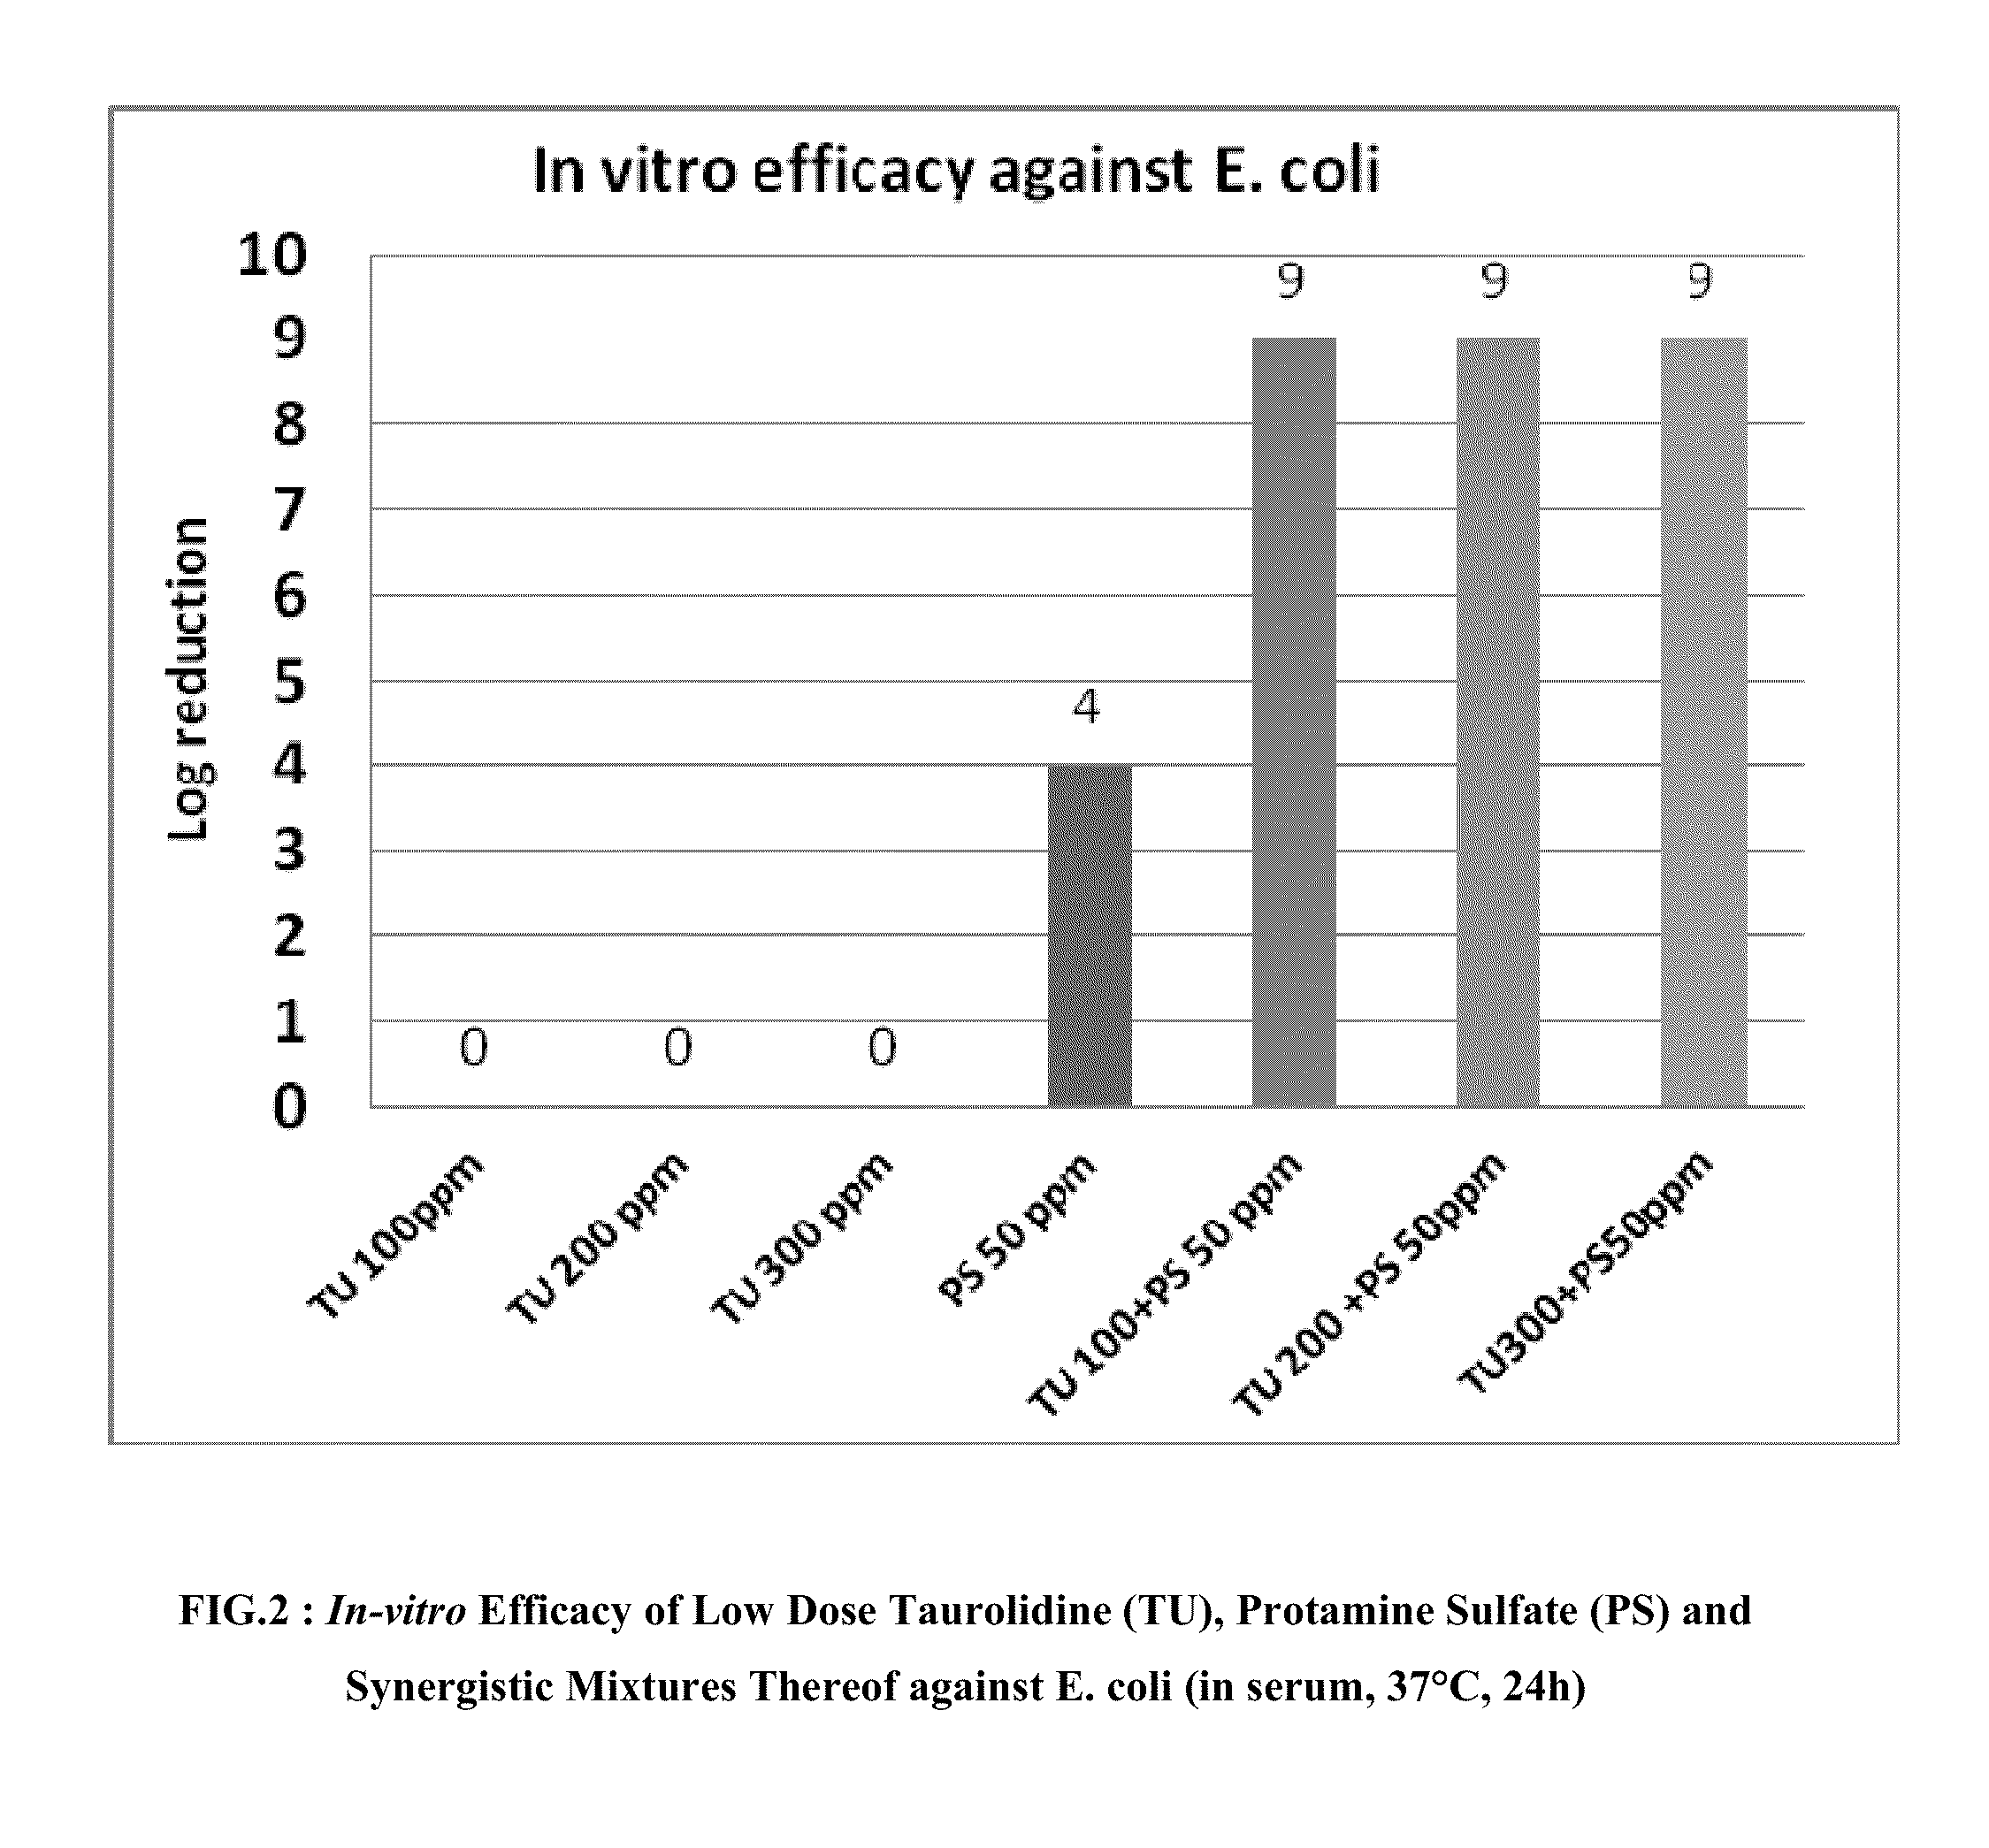 Broad-spectrum antimicrobial compositions based on combinations of taurolidine and protamine and medical devices containing such compositions